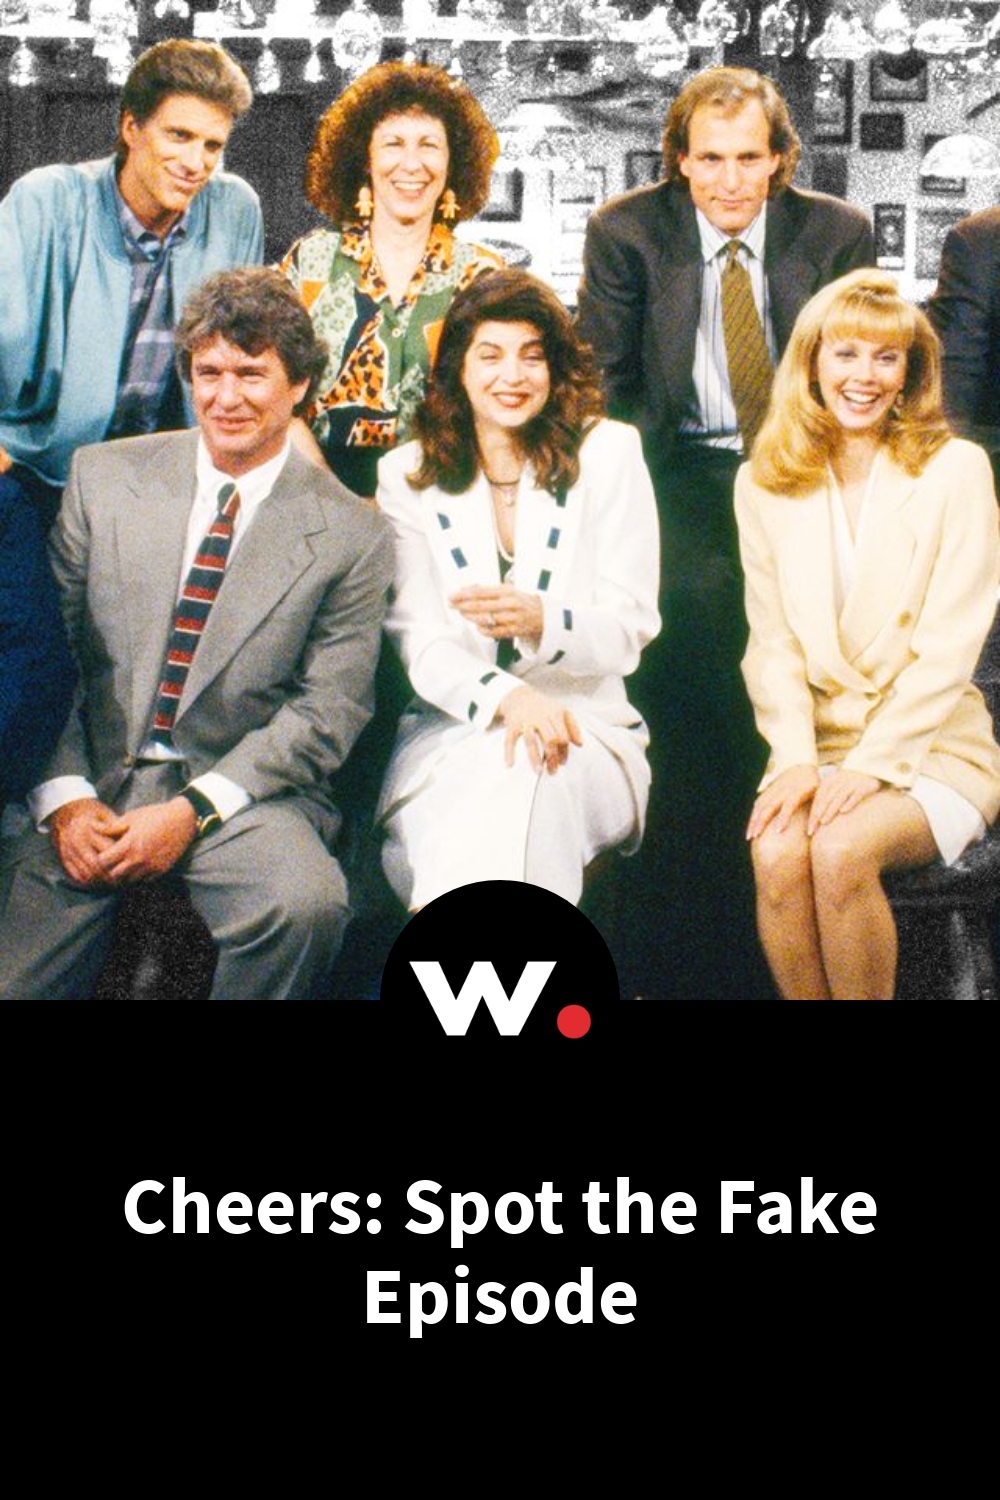 Cheers: Spot the Fake Episode